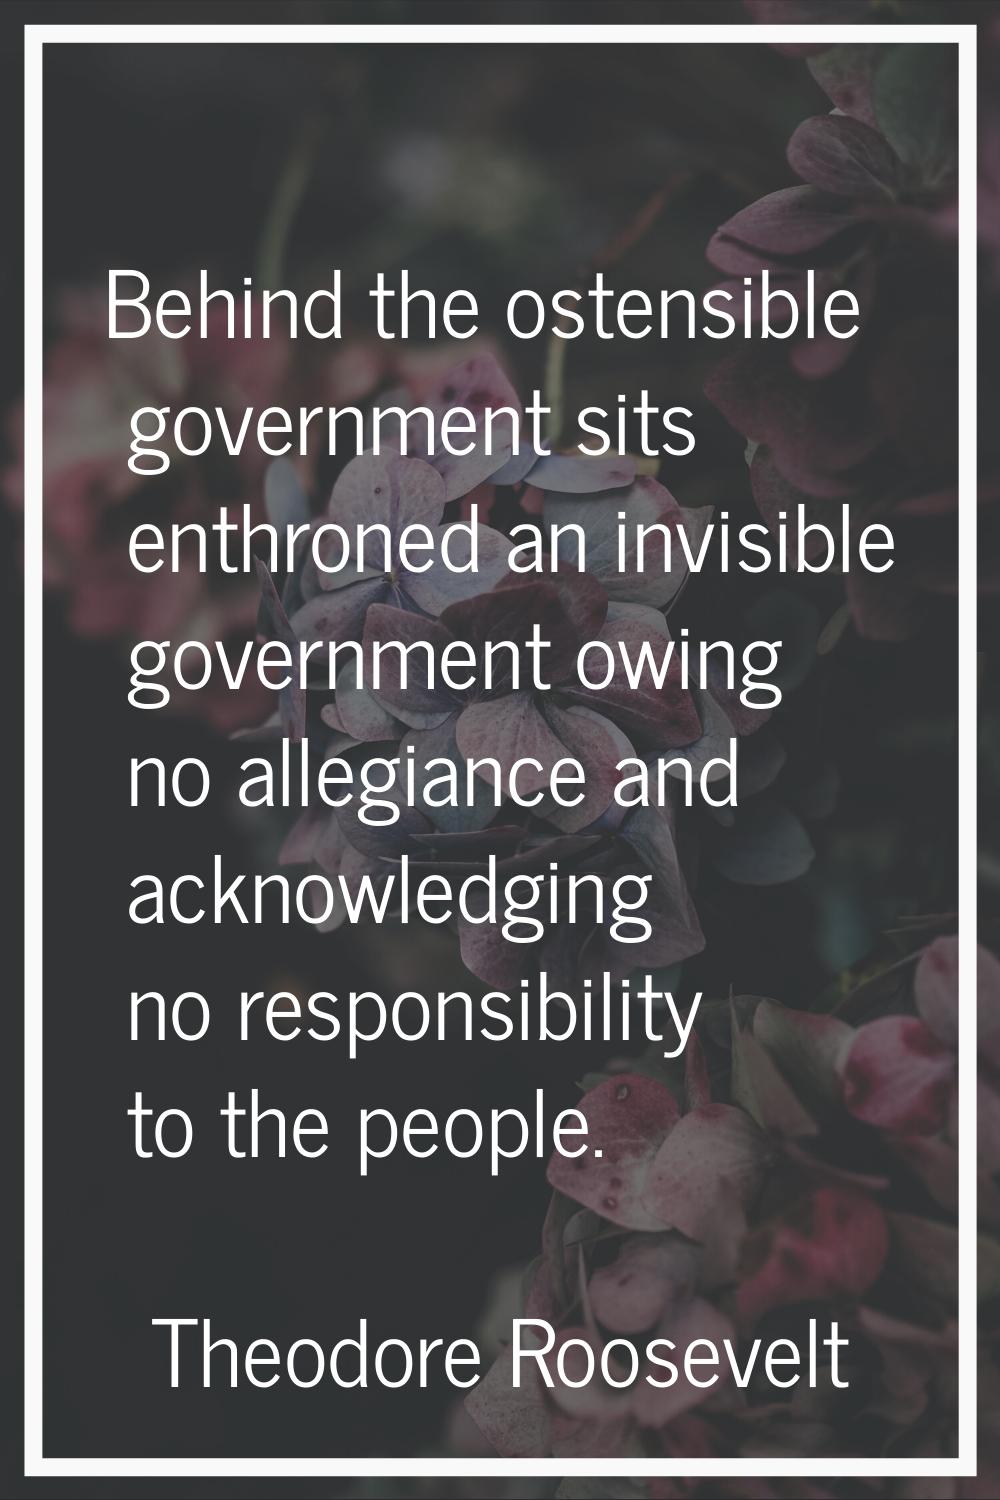 Behind the ostensible government sits enthroned an invisible government owing no allegiance and ack